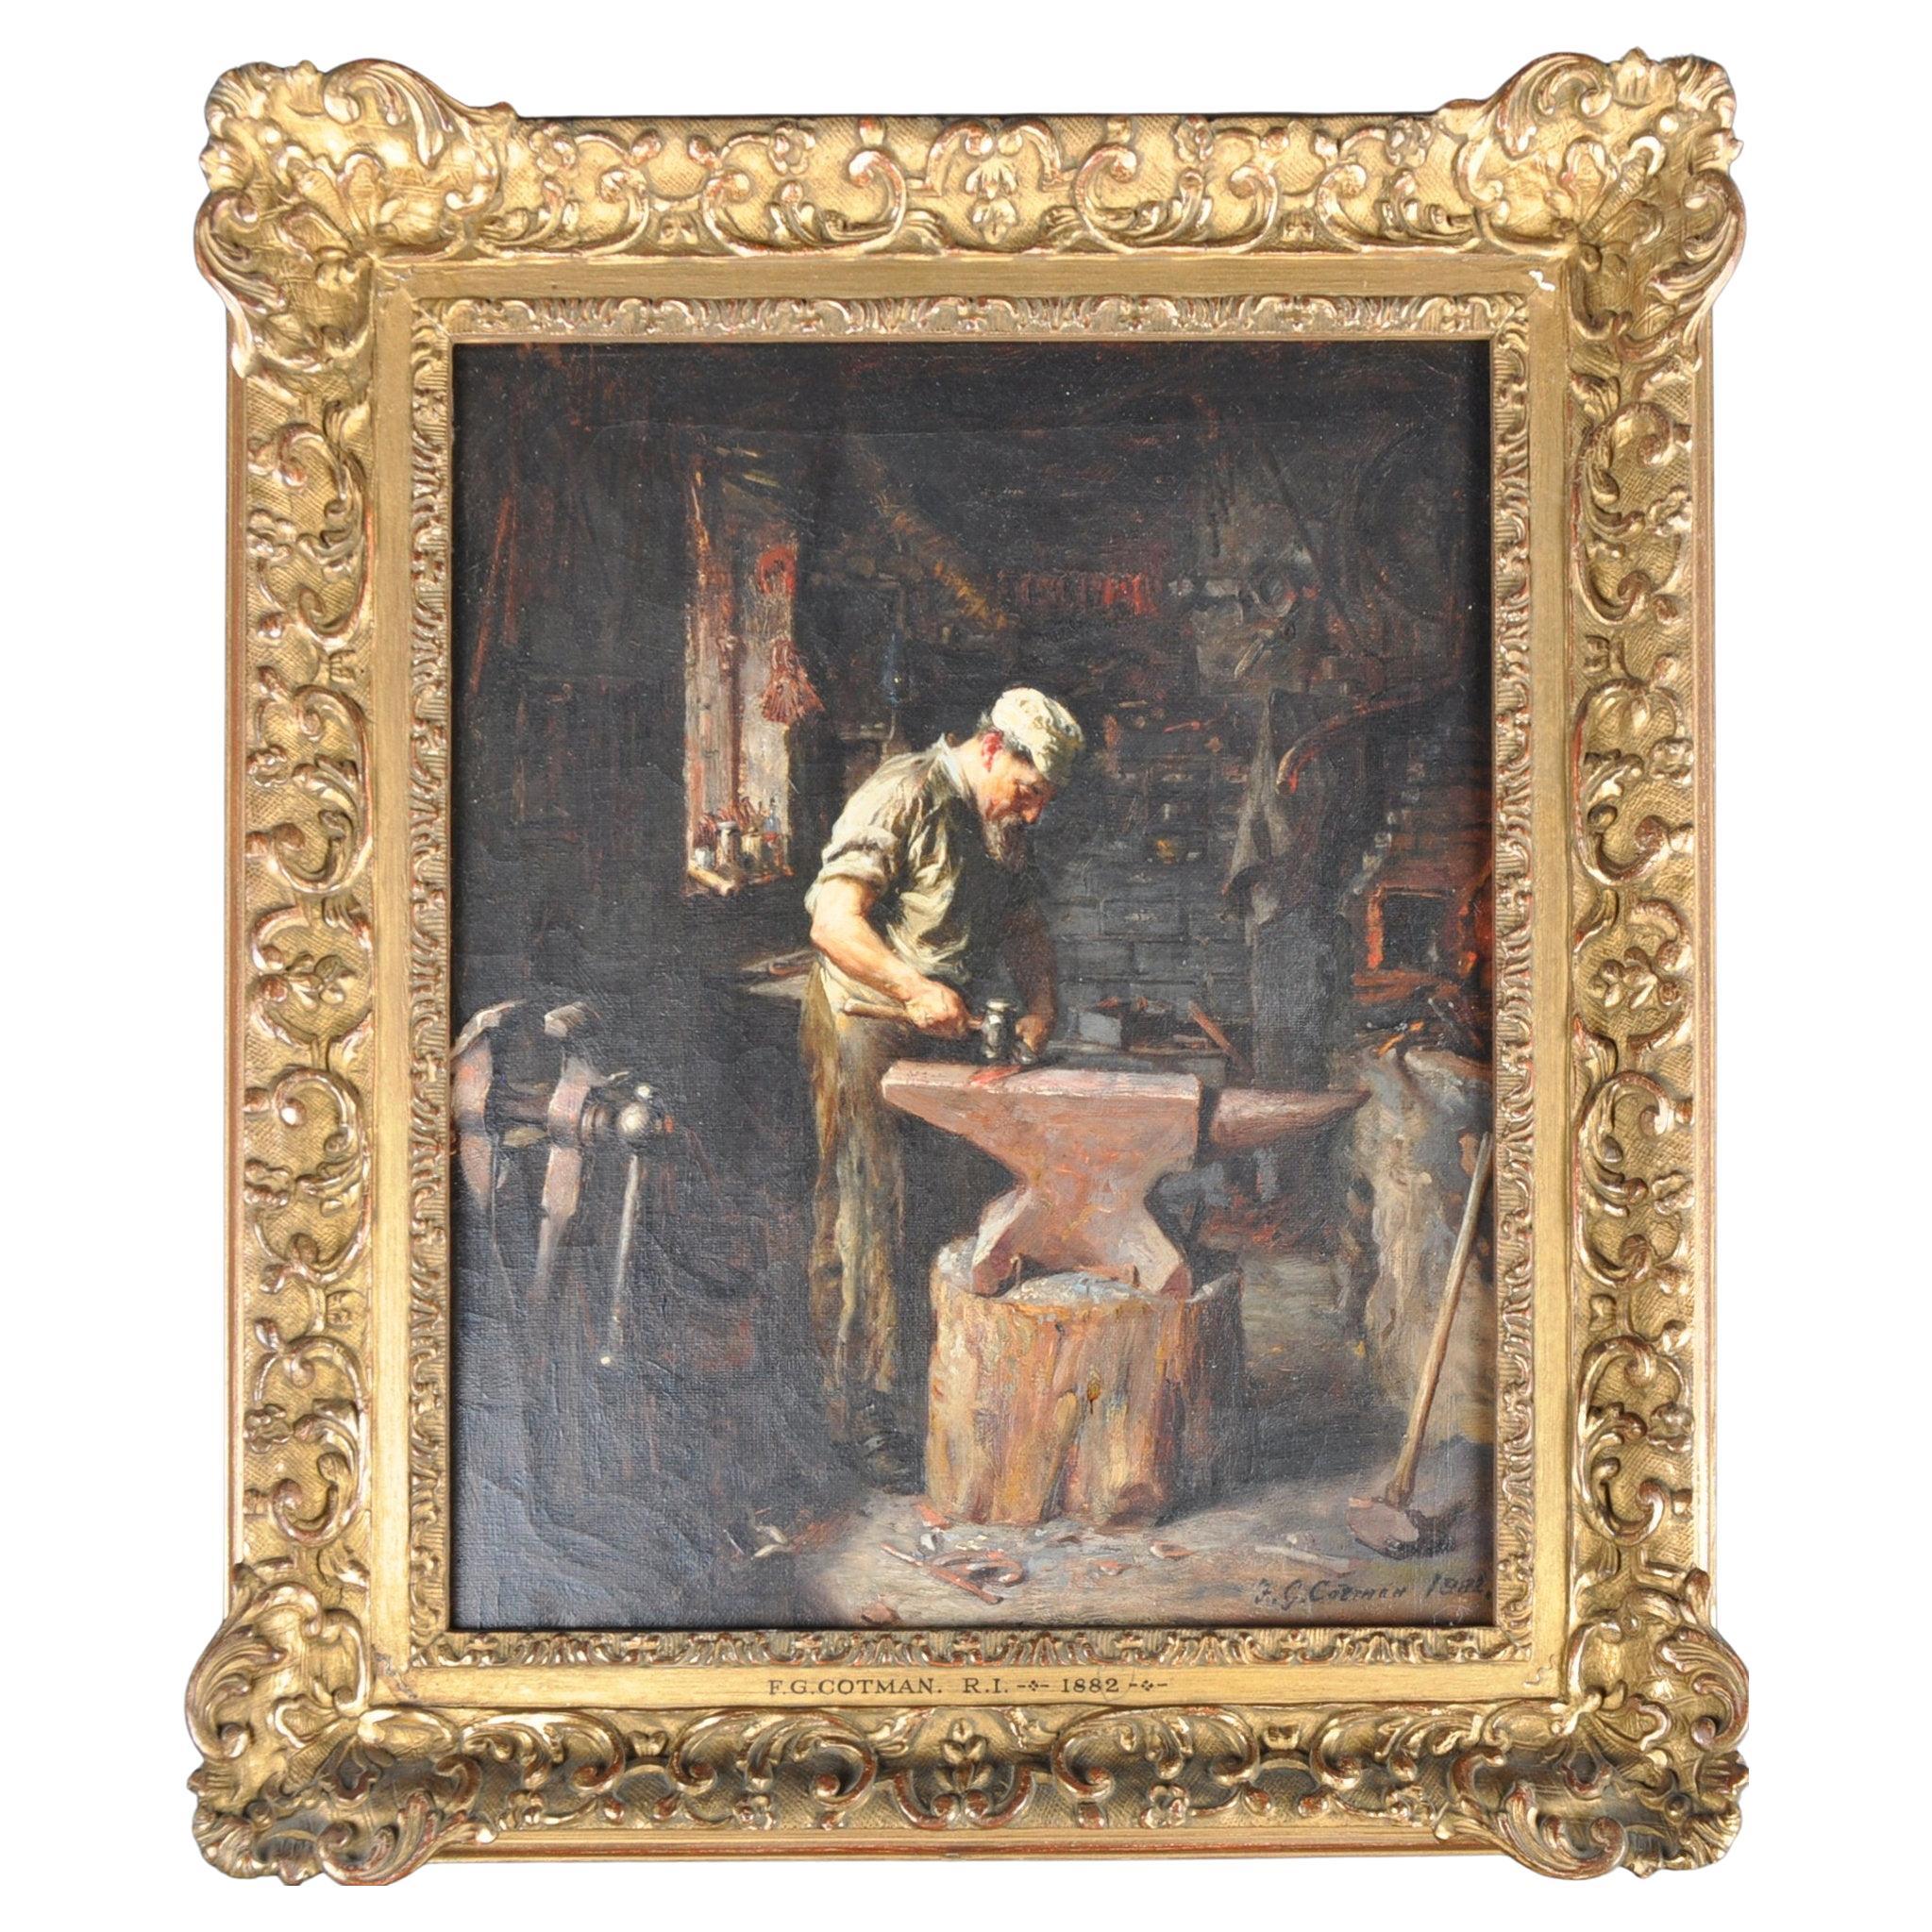 ANTIQUE VICTORIAN FREDERICK GEORGE COTMAN 1882 OIL PAINTING OF A BLACKSMiTH